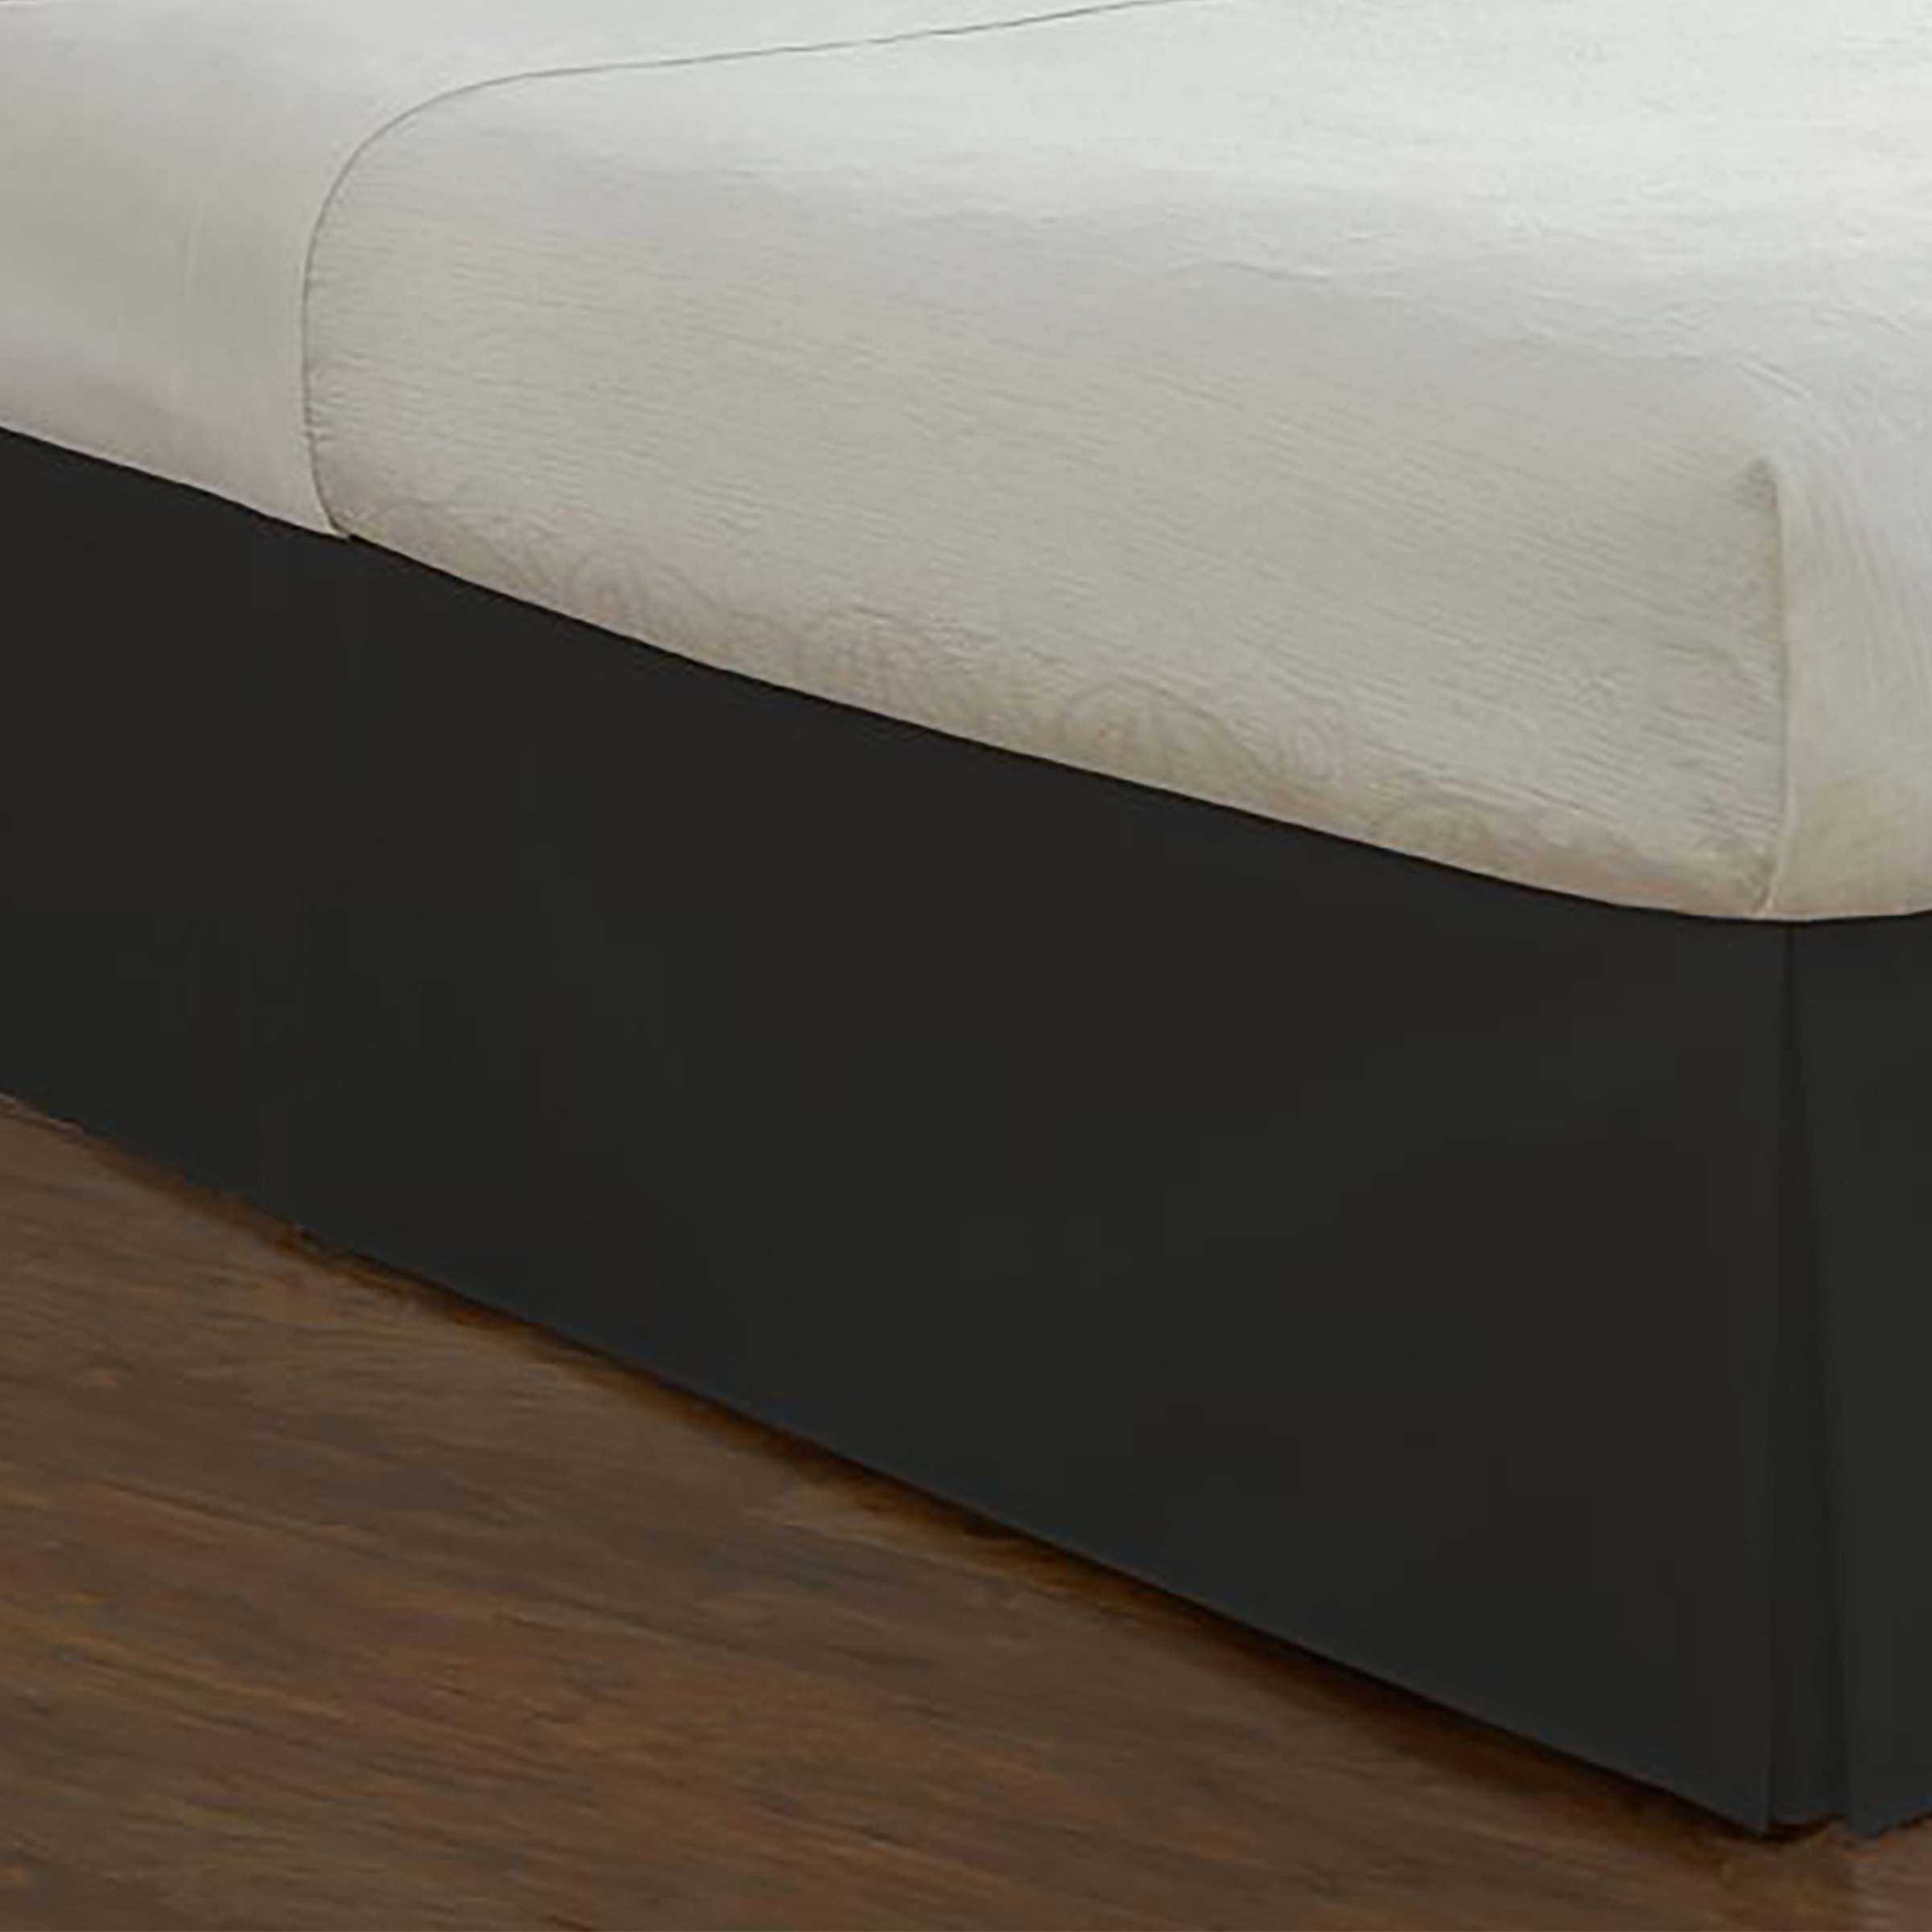 Luxury Hotel Microfiber Tailored Style Bed Skirt with Classic 14 Inch Drop Length, Twin, Black - image 4 of 6